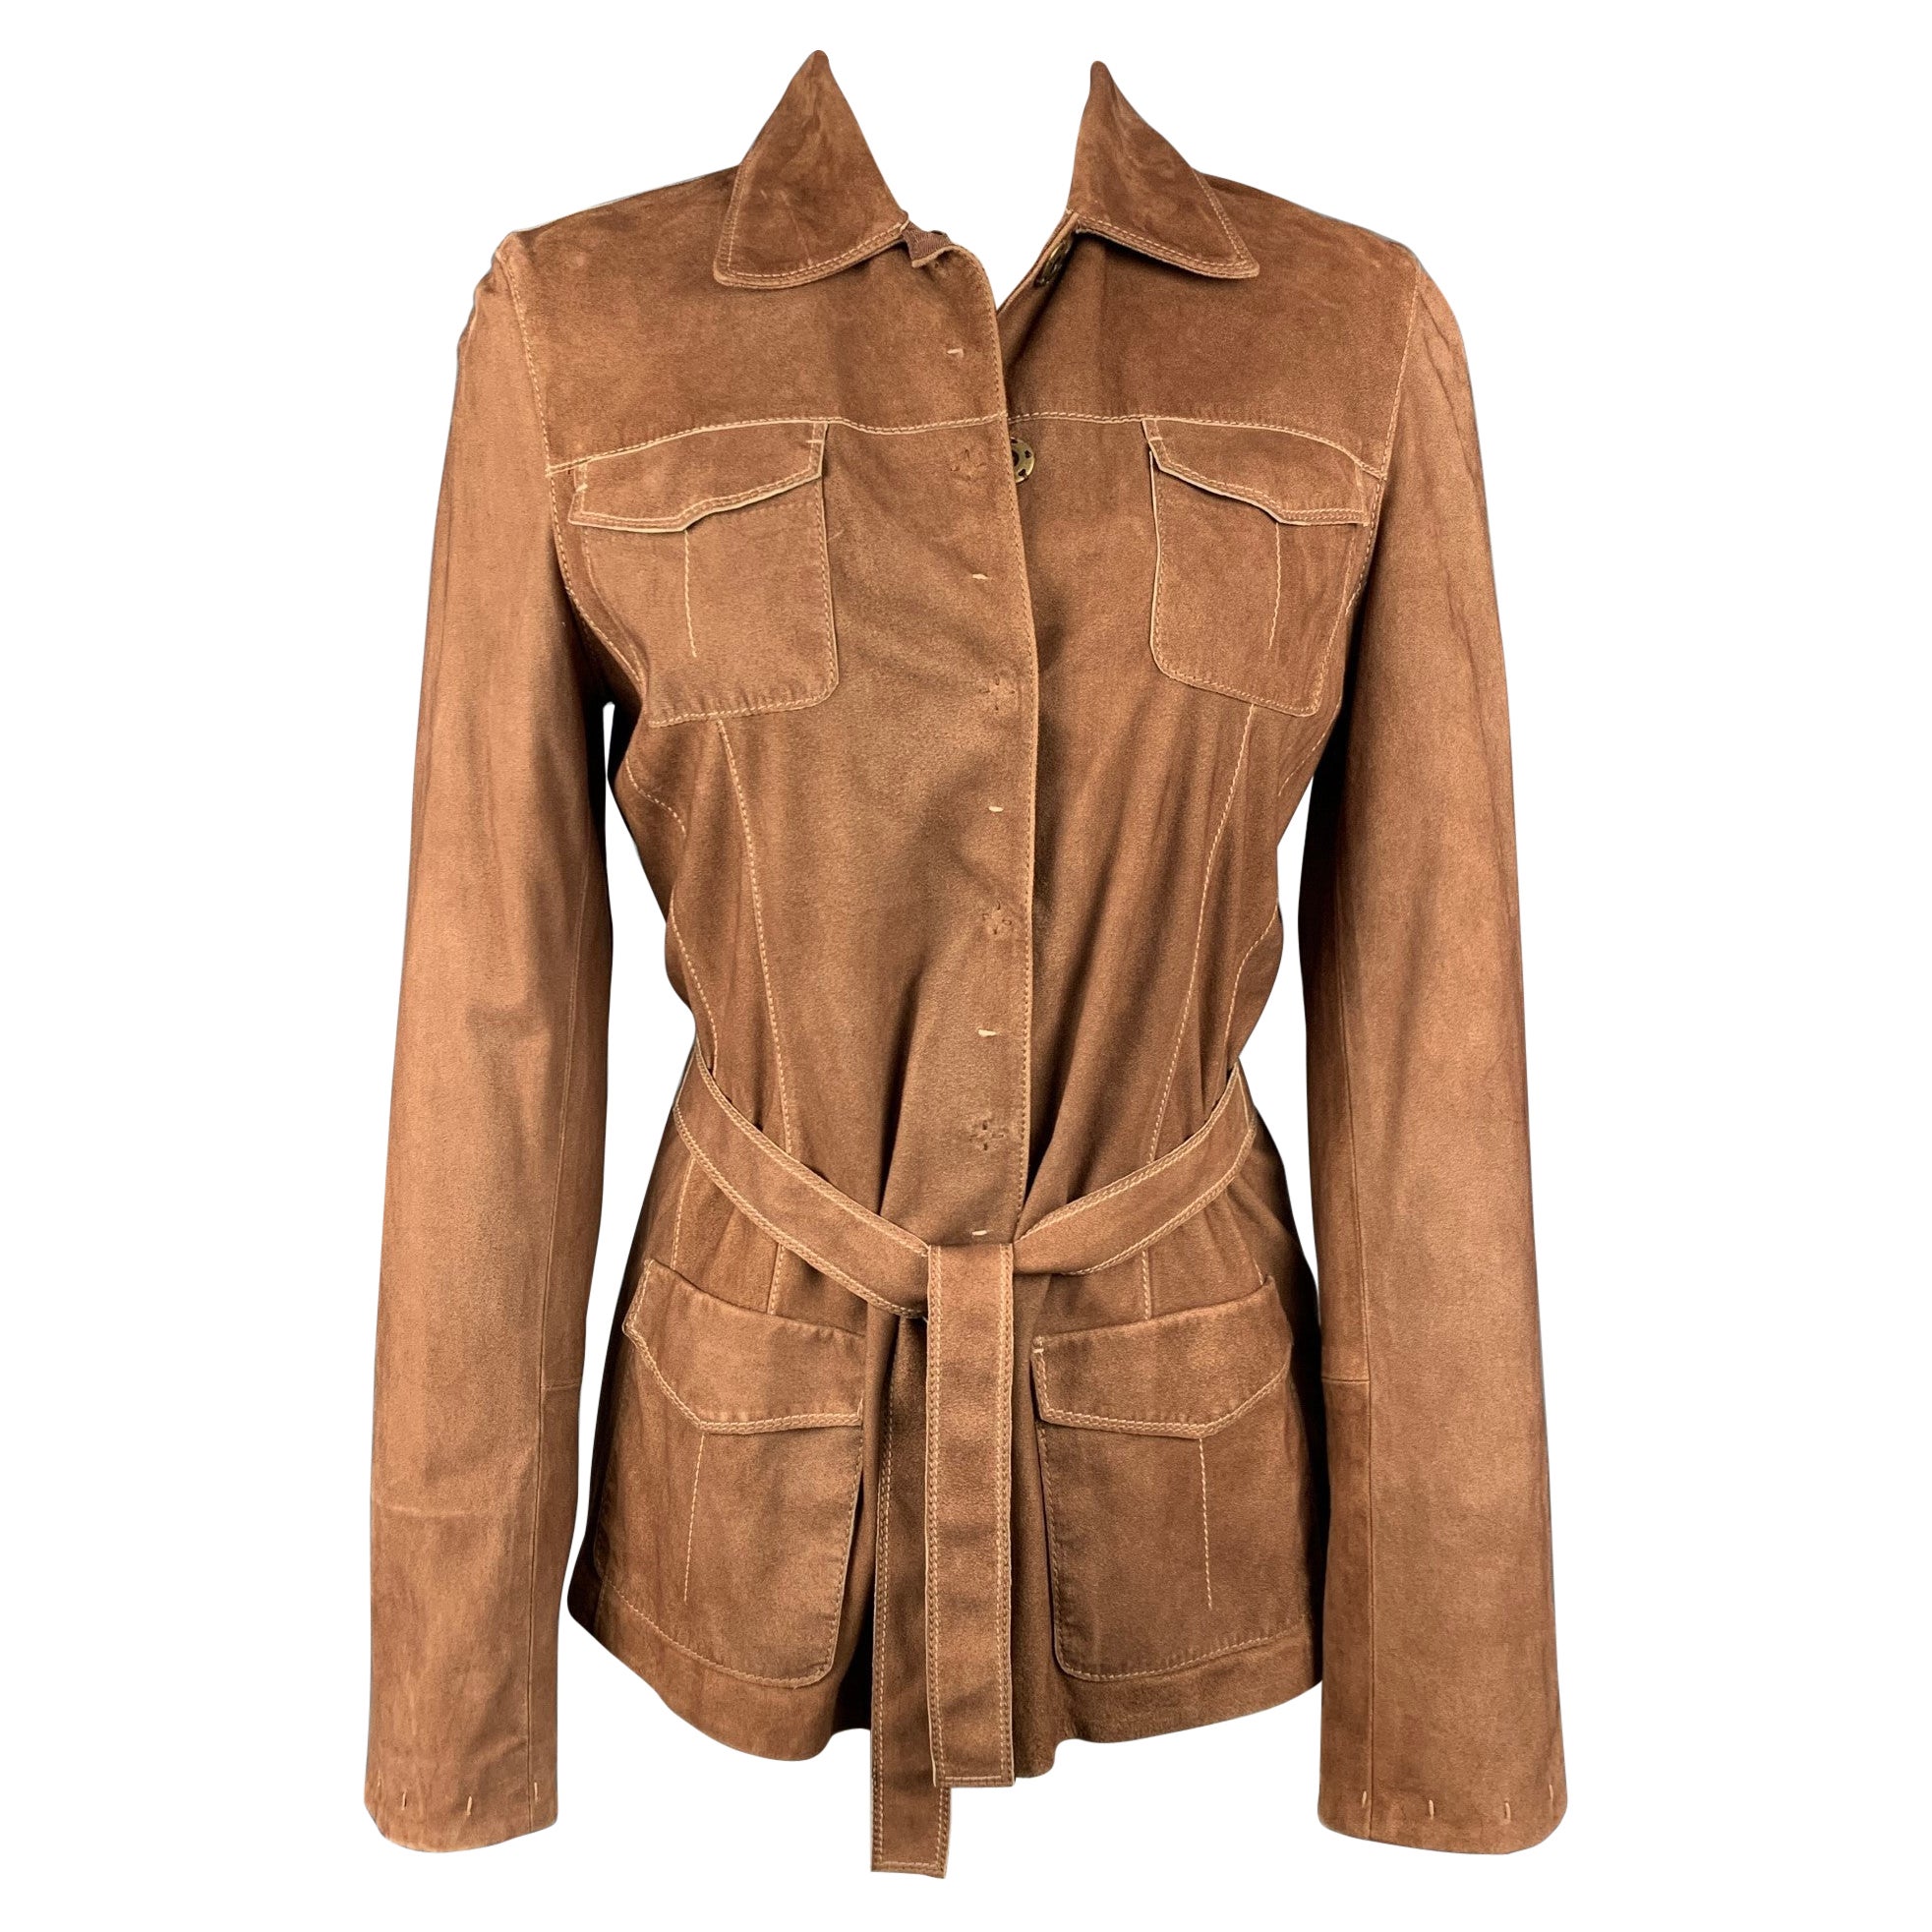 ELIE TAHARI Size S Tan Contrast Stitching Suede Belted Jacket